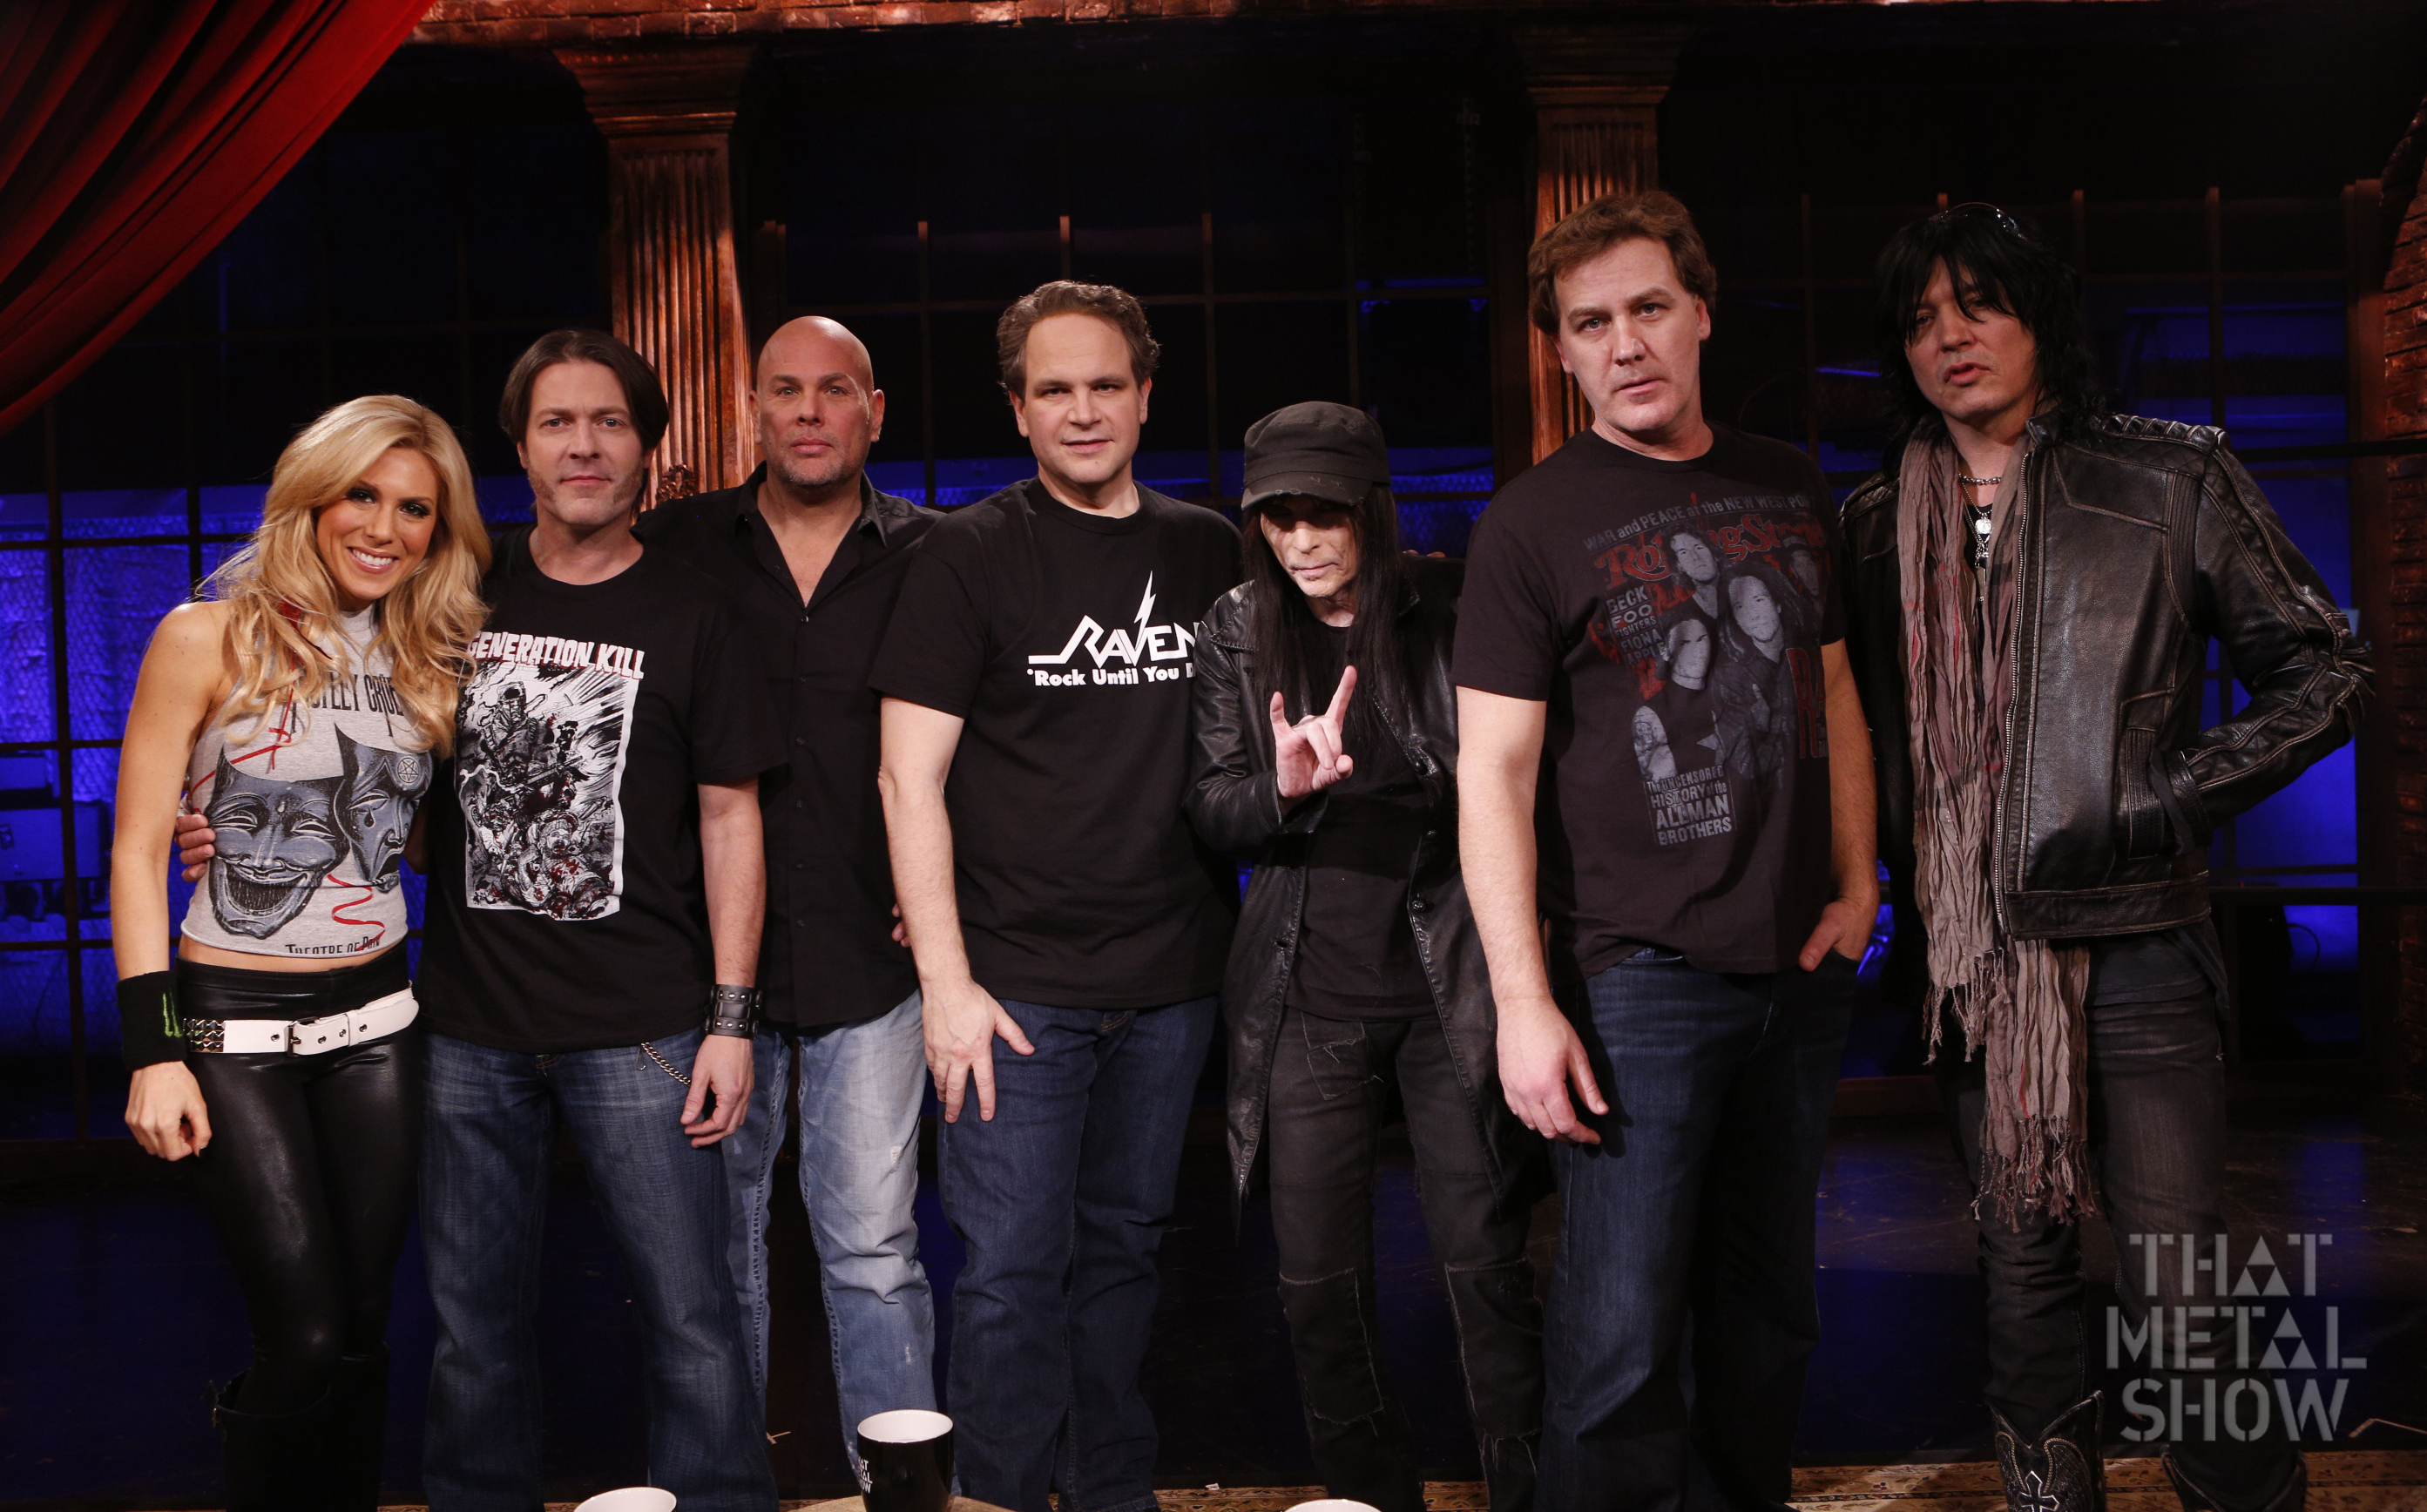 THE ROCK REVIVAL INVADES VH1’s ‘THAT METAL SHOW’ WITH MICK MARS OF MÖTLEY CRÜE AND MORE